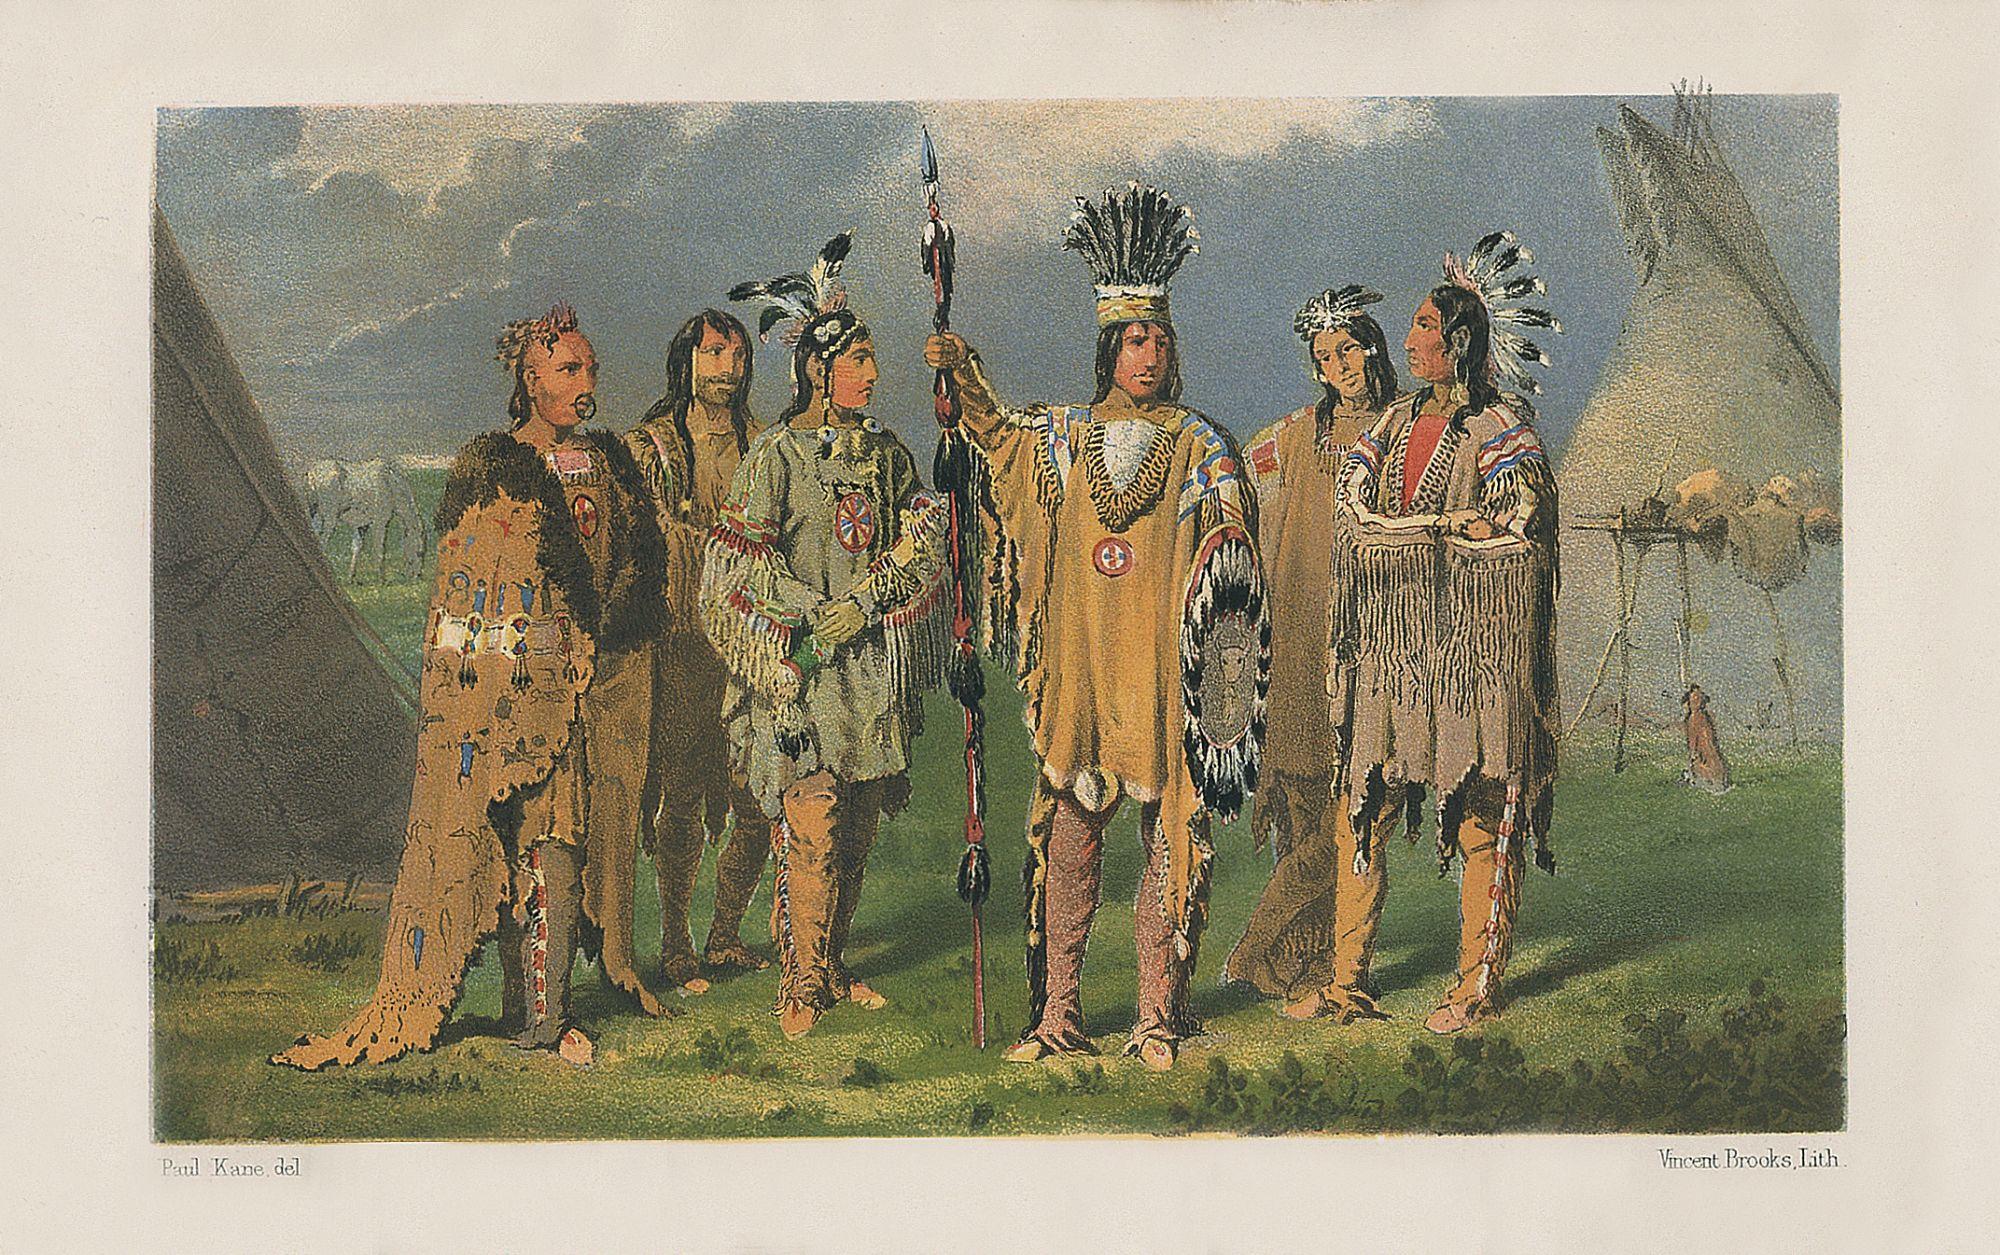 Kane, Paul (1810-1871)
Wanderings of an Artist Among the Indians of North America; From Canada to Vancouver Island and Oregon Through the Hudson's Bay Company Territory, and Back Again. 
London: Longman, Brown, Green, Longmans, and Roberts, 1859.